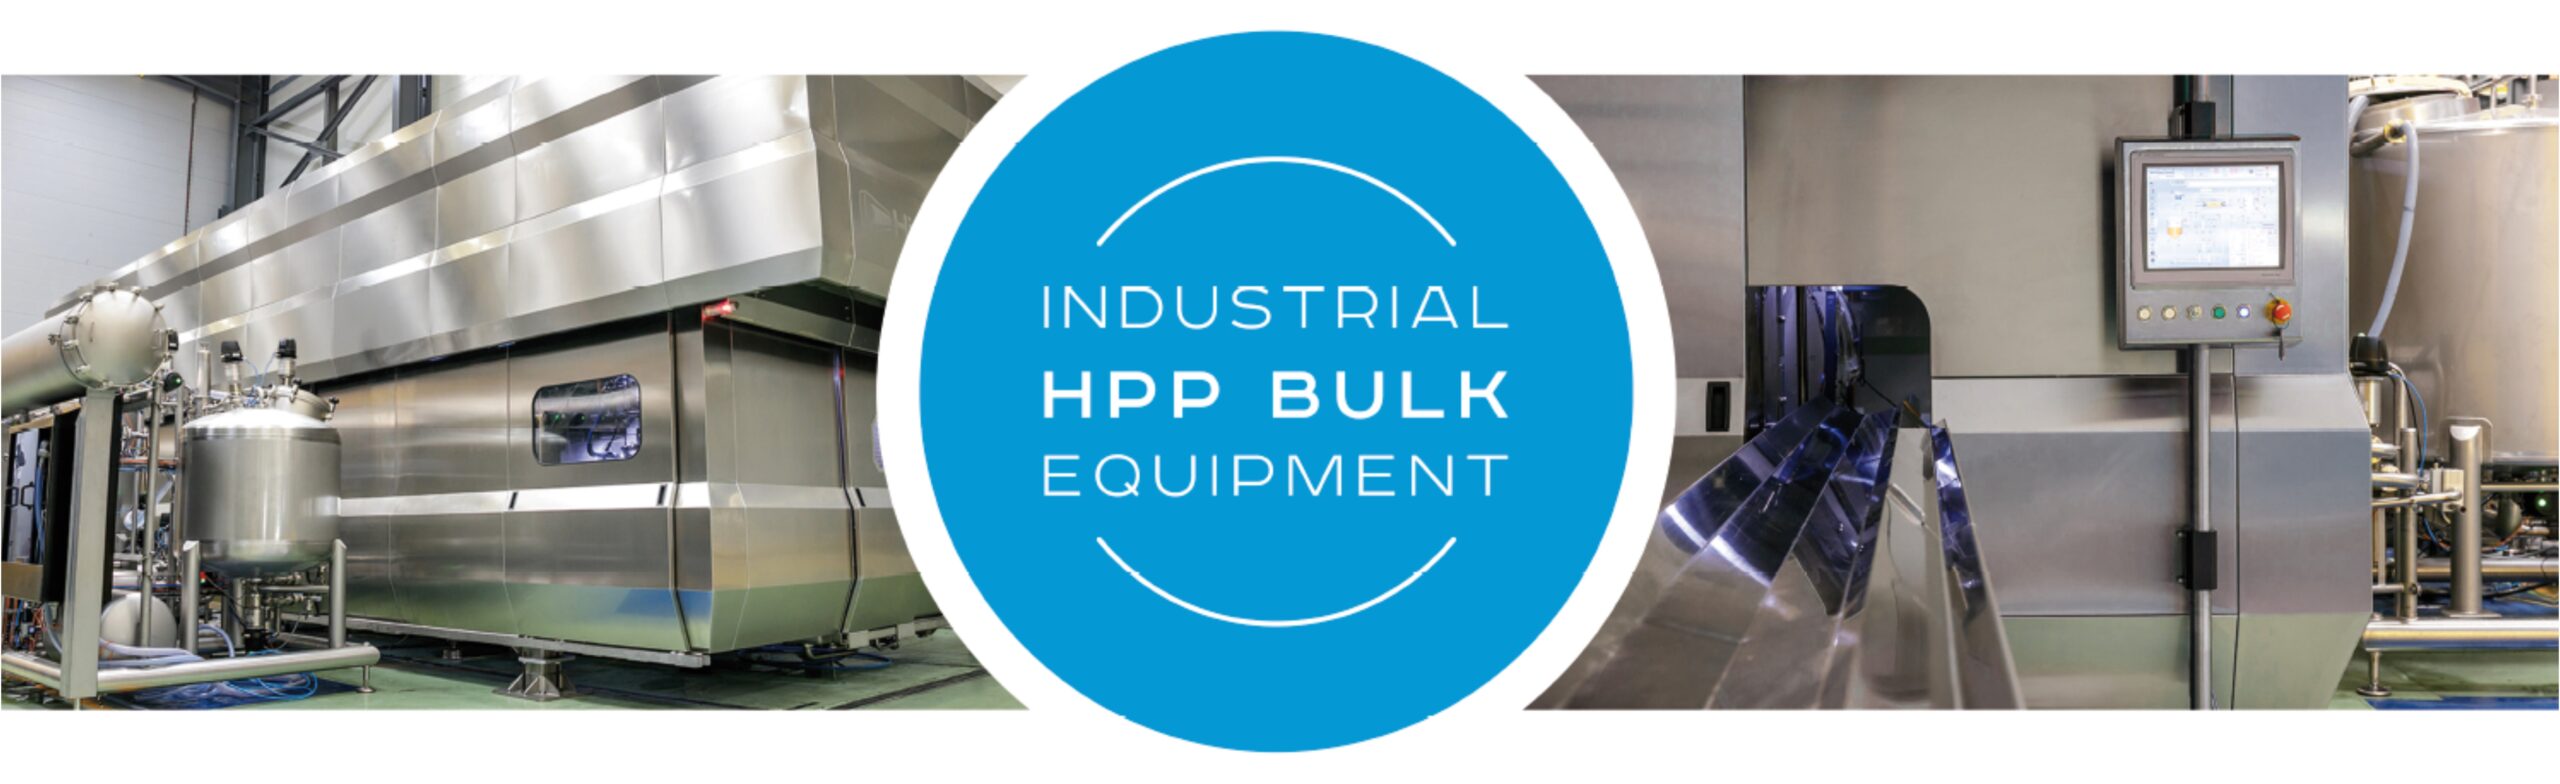 Machine In-Bulk, a global innovation from Hiperbaric